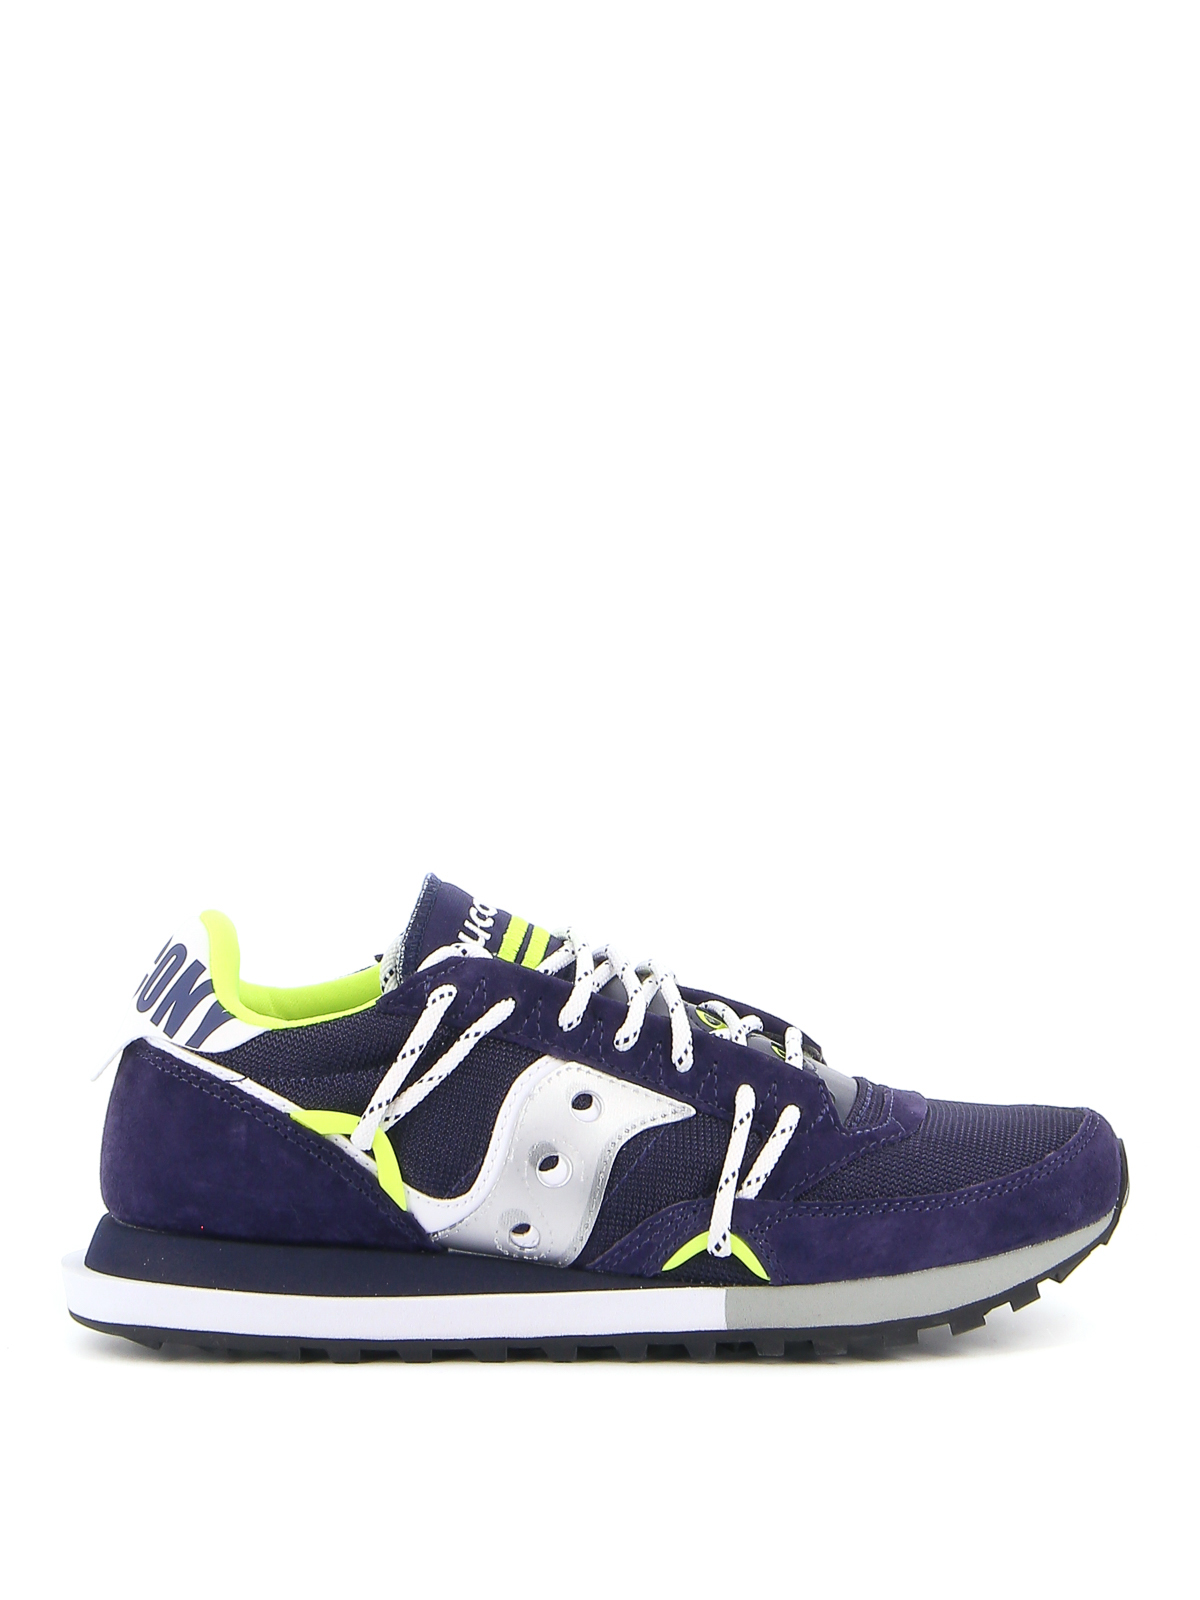 Saucony - Jazz Dst sneakers - trainers - 705289 | Shop online at iKRIX